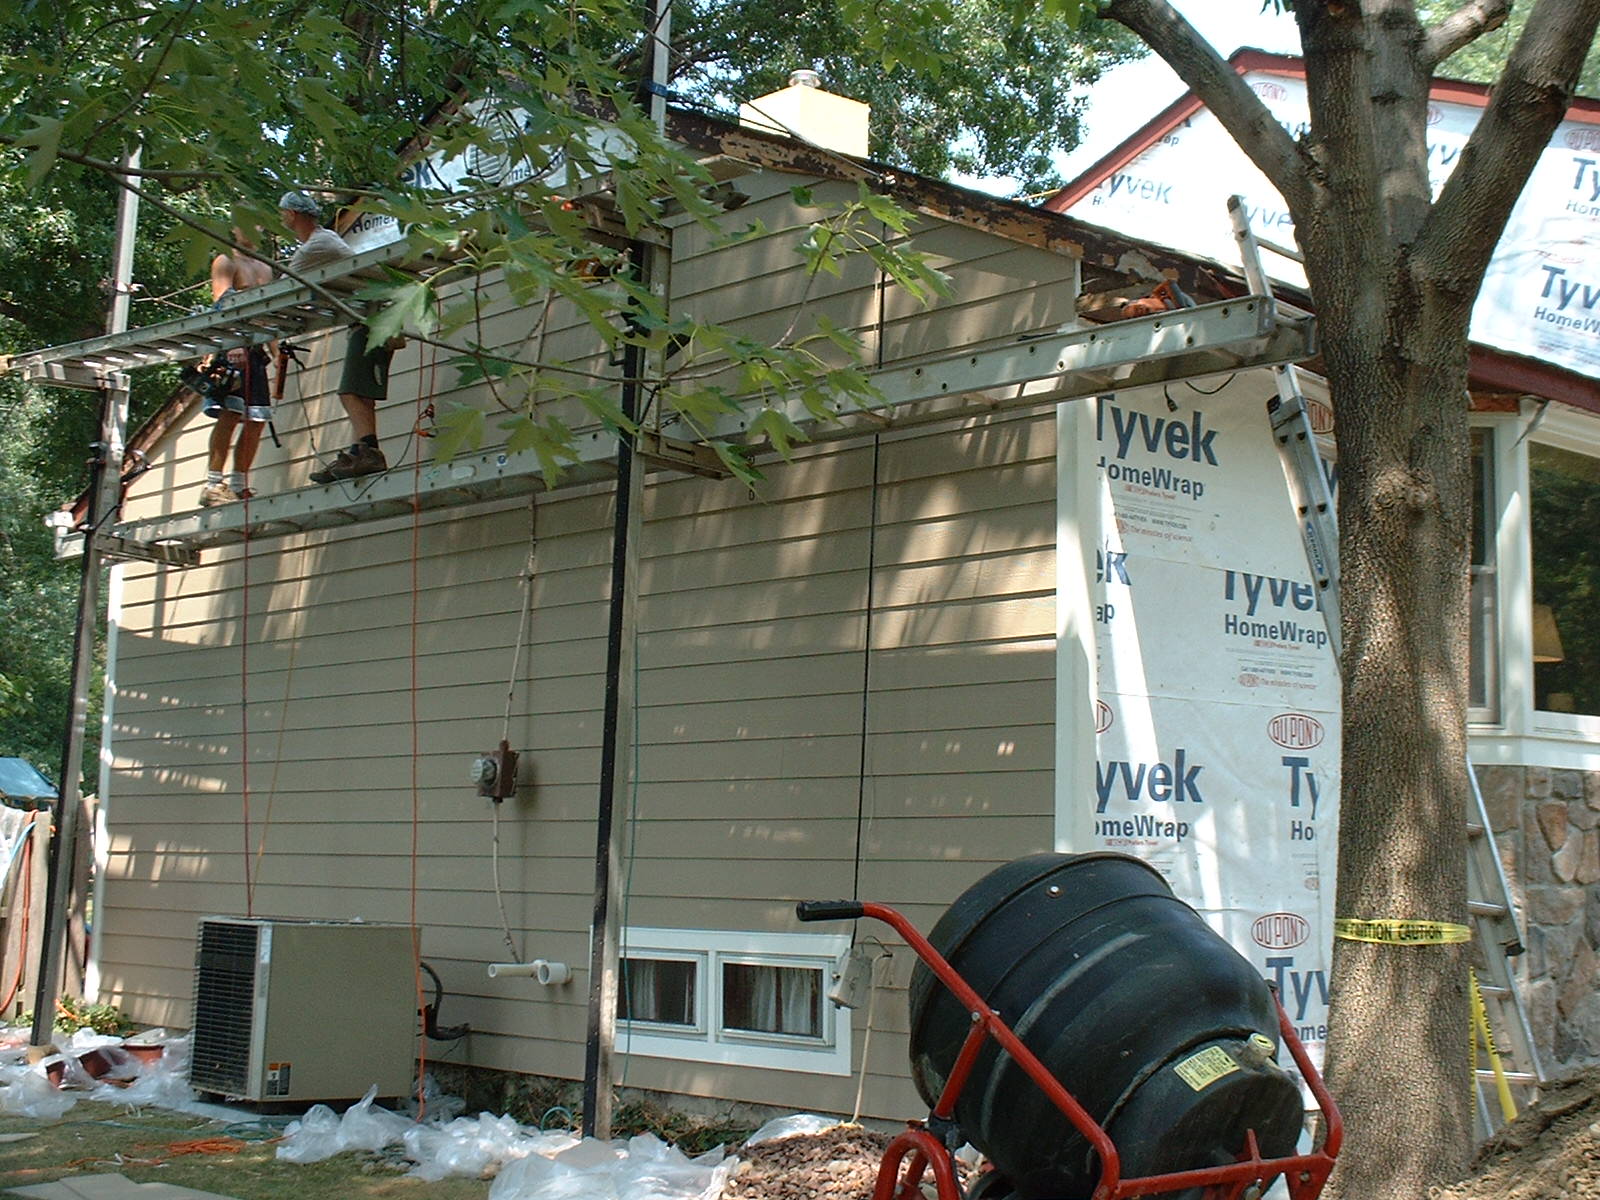 The Hardy Board siding is finished on the left side of the house.